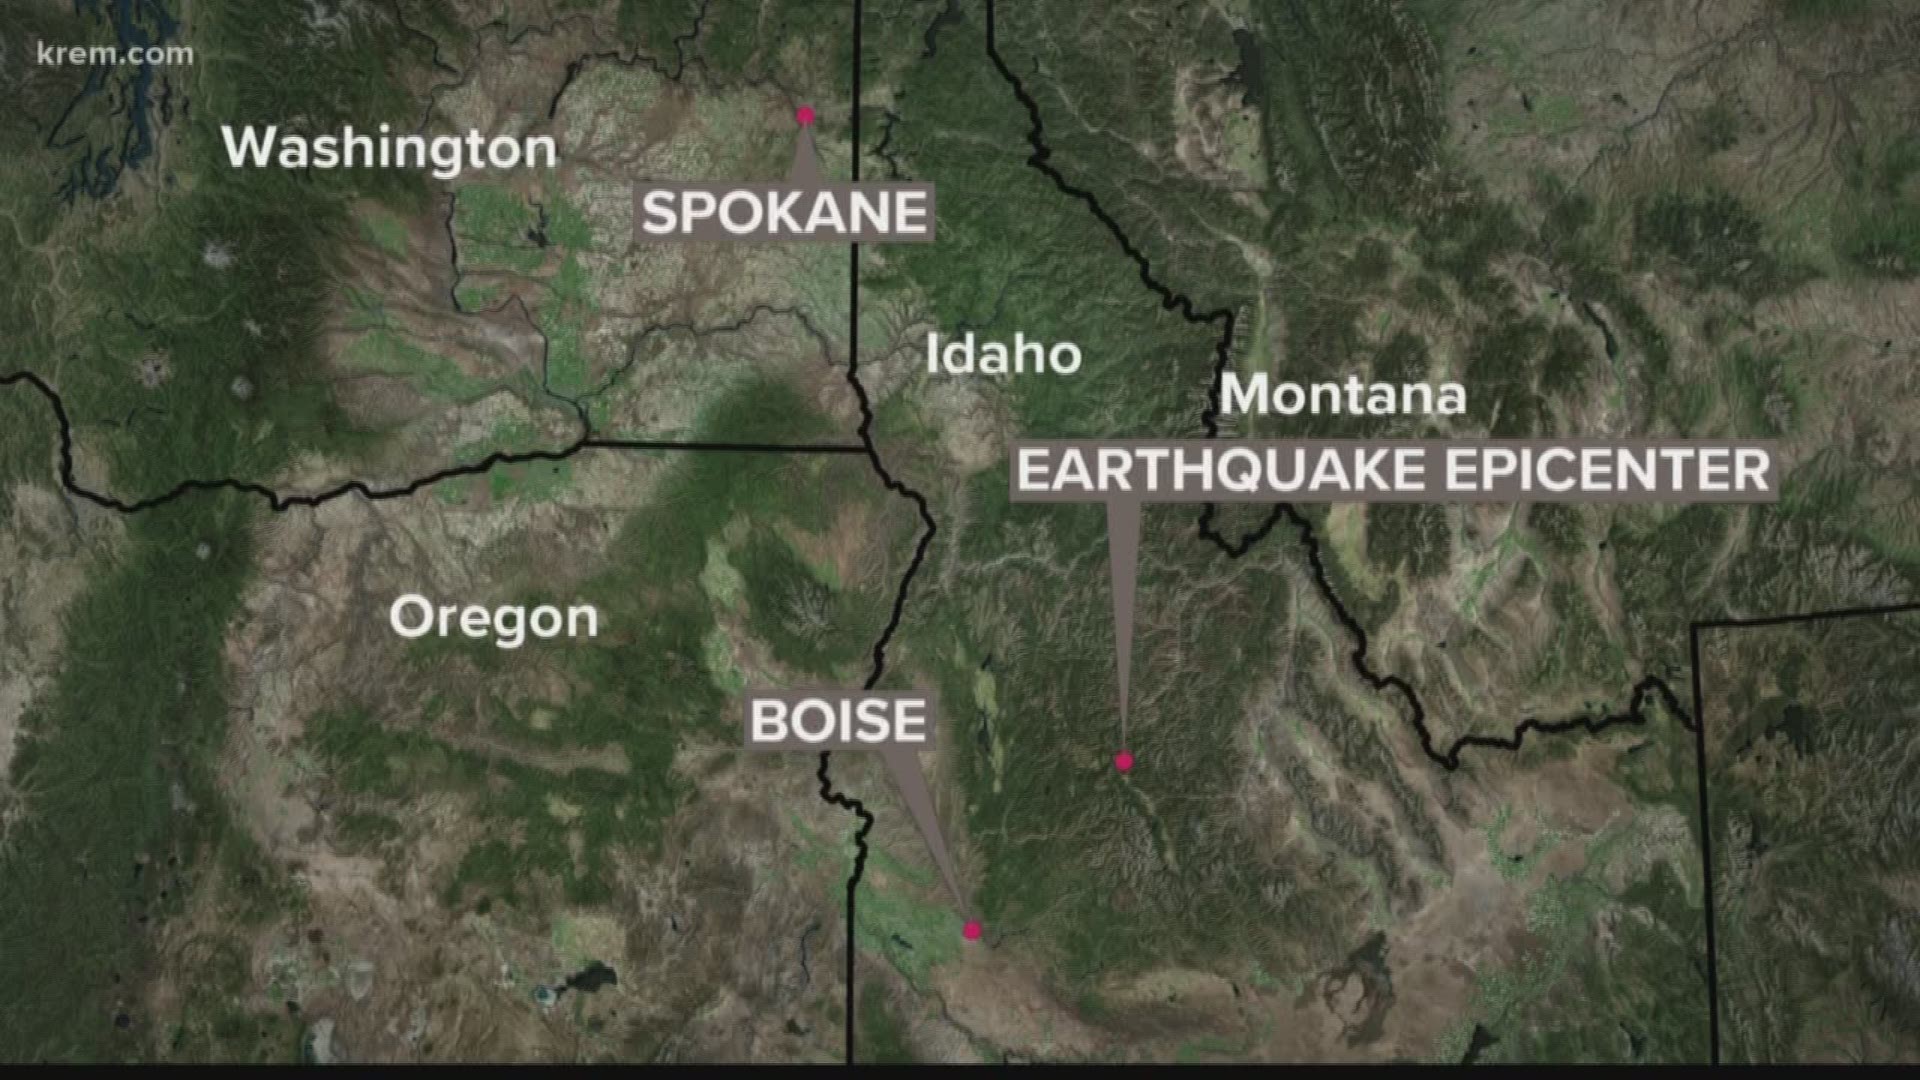 The United States Geological Survey confirmed there was a 6.5 magnitude earthquake in Idaho at 4:52 p.m. It was felt in the Spokane area.